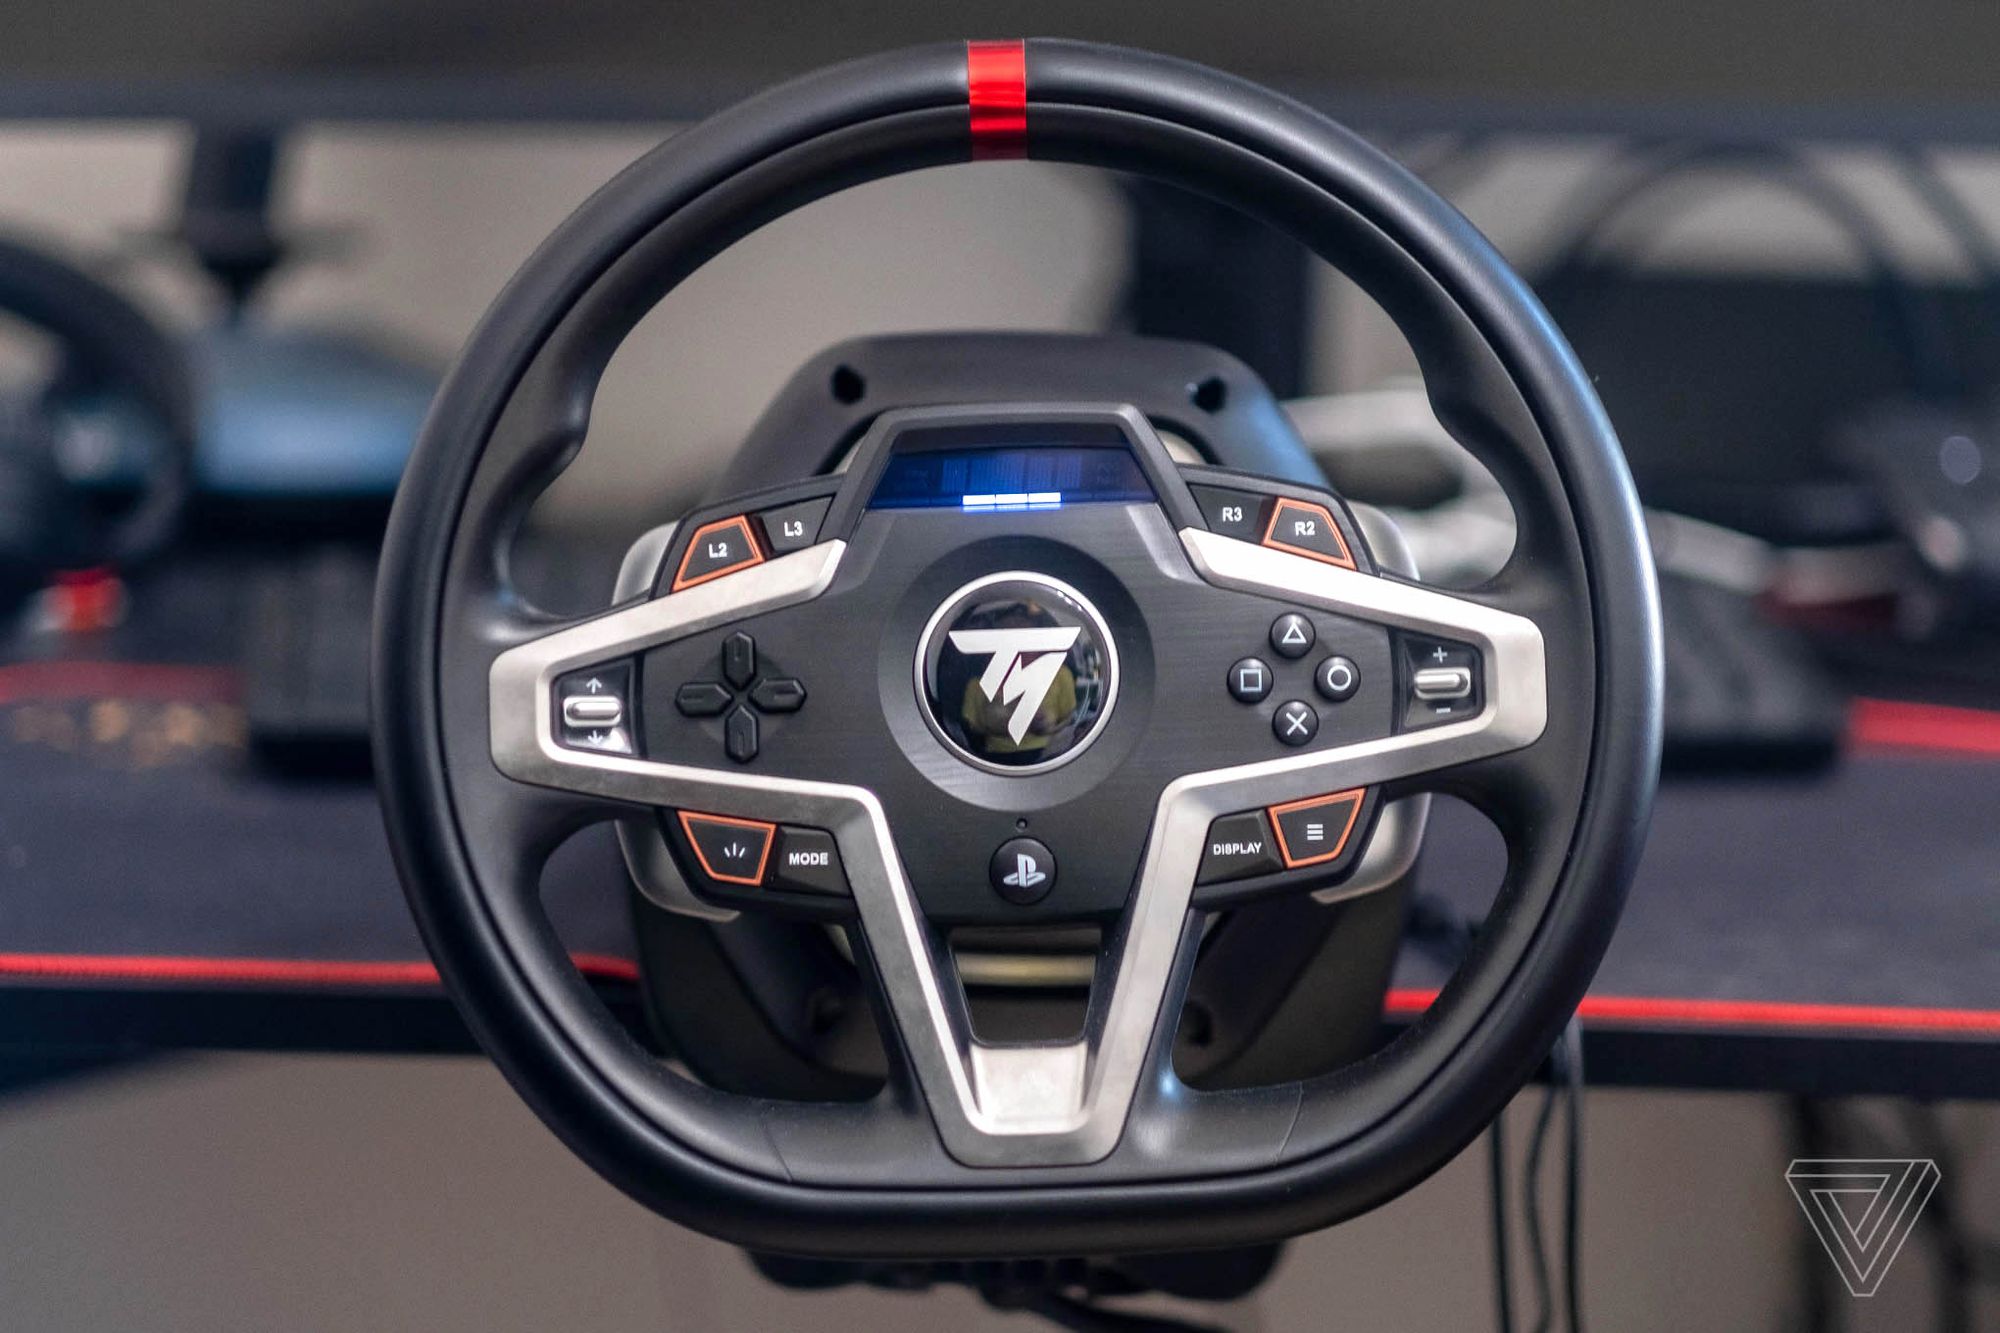 Thrustmaster's T248 is a great PS5 racing wheel - The Verge